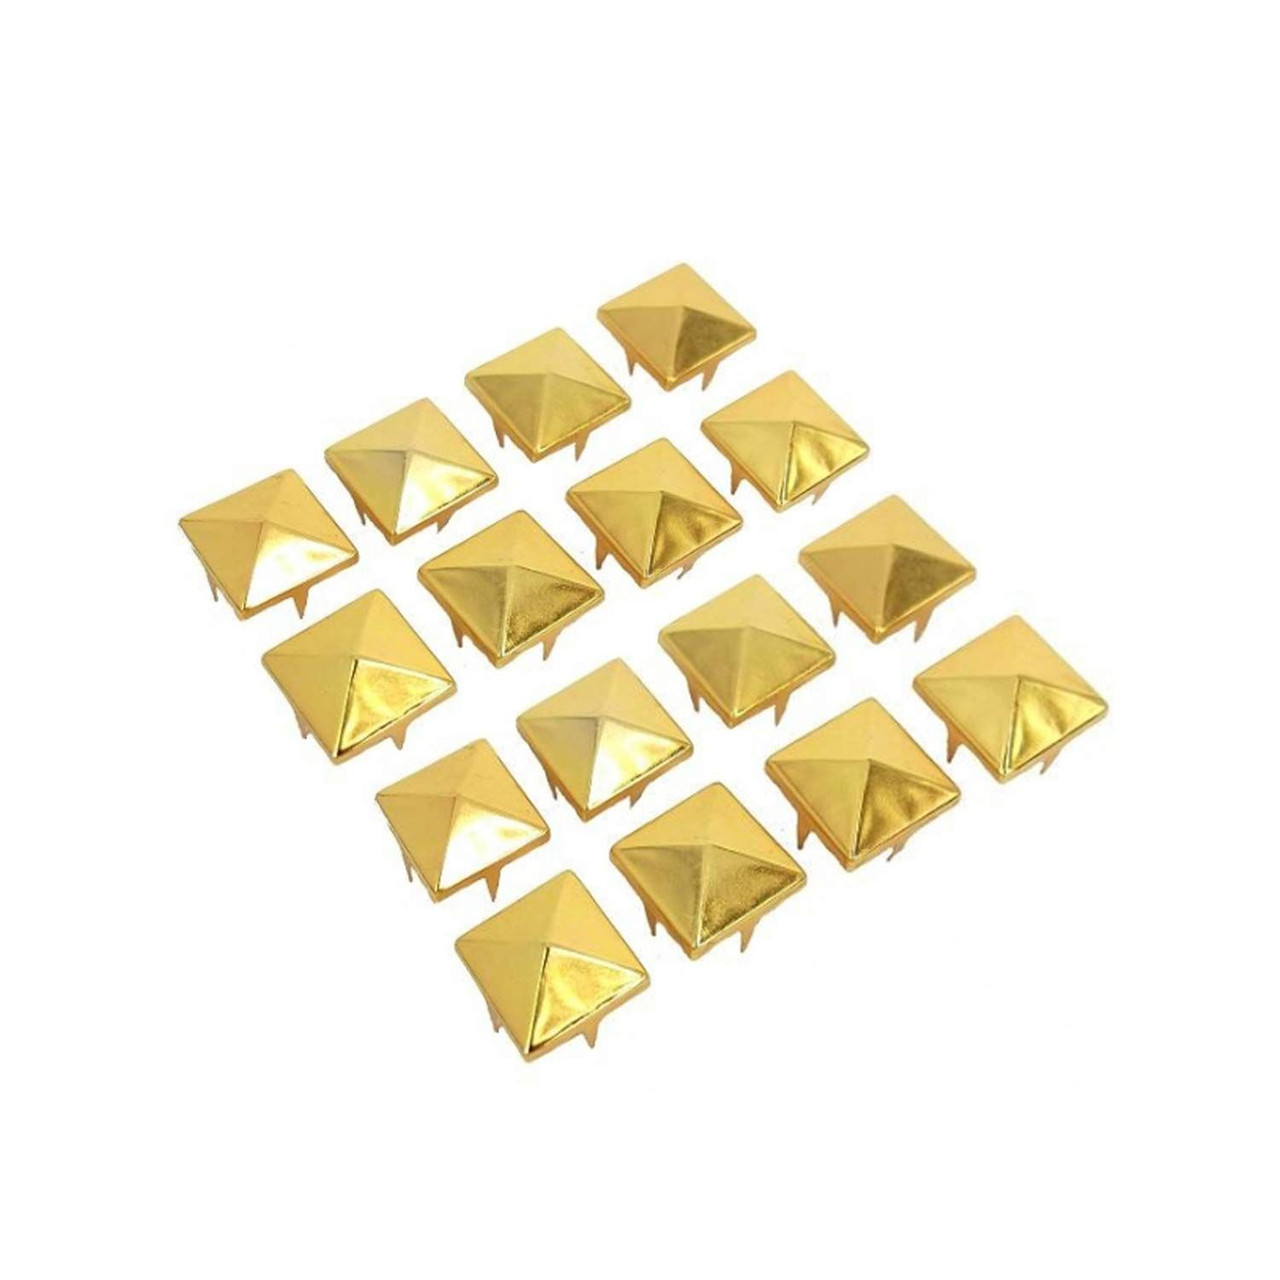 Pyramid Head Square Studs with Prongs